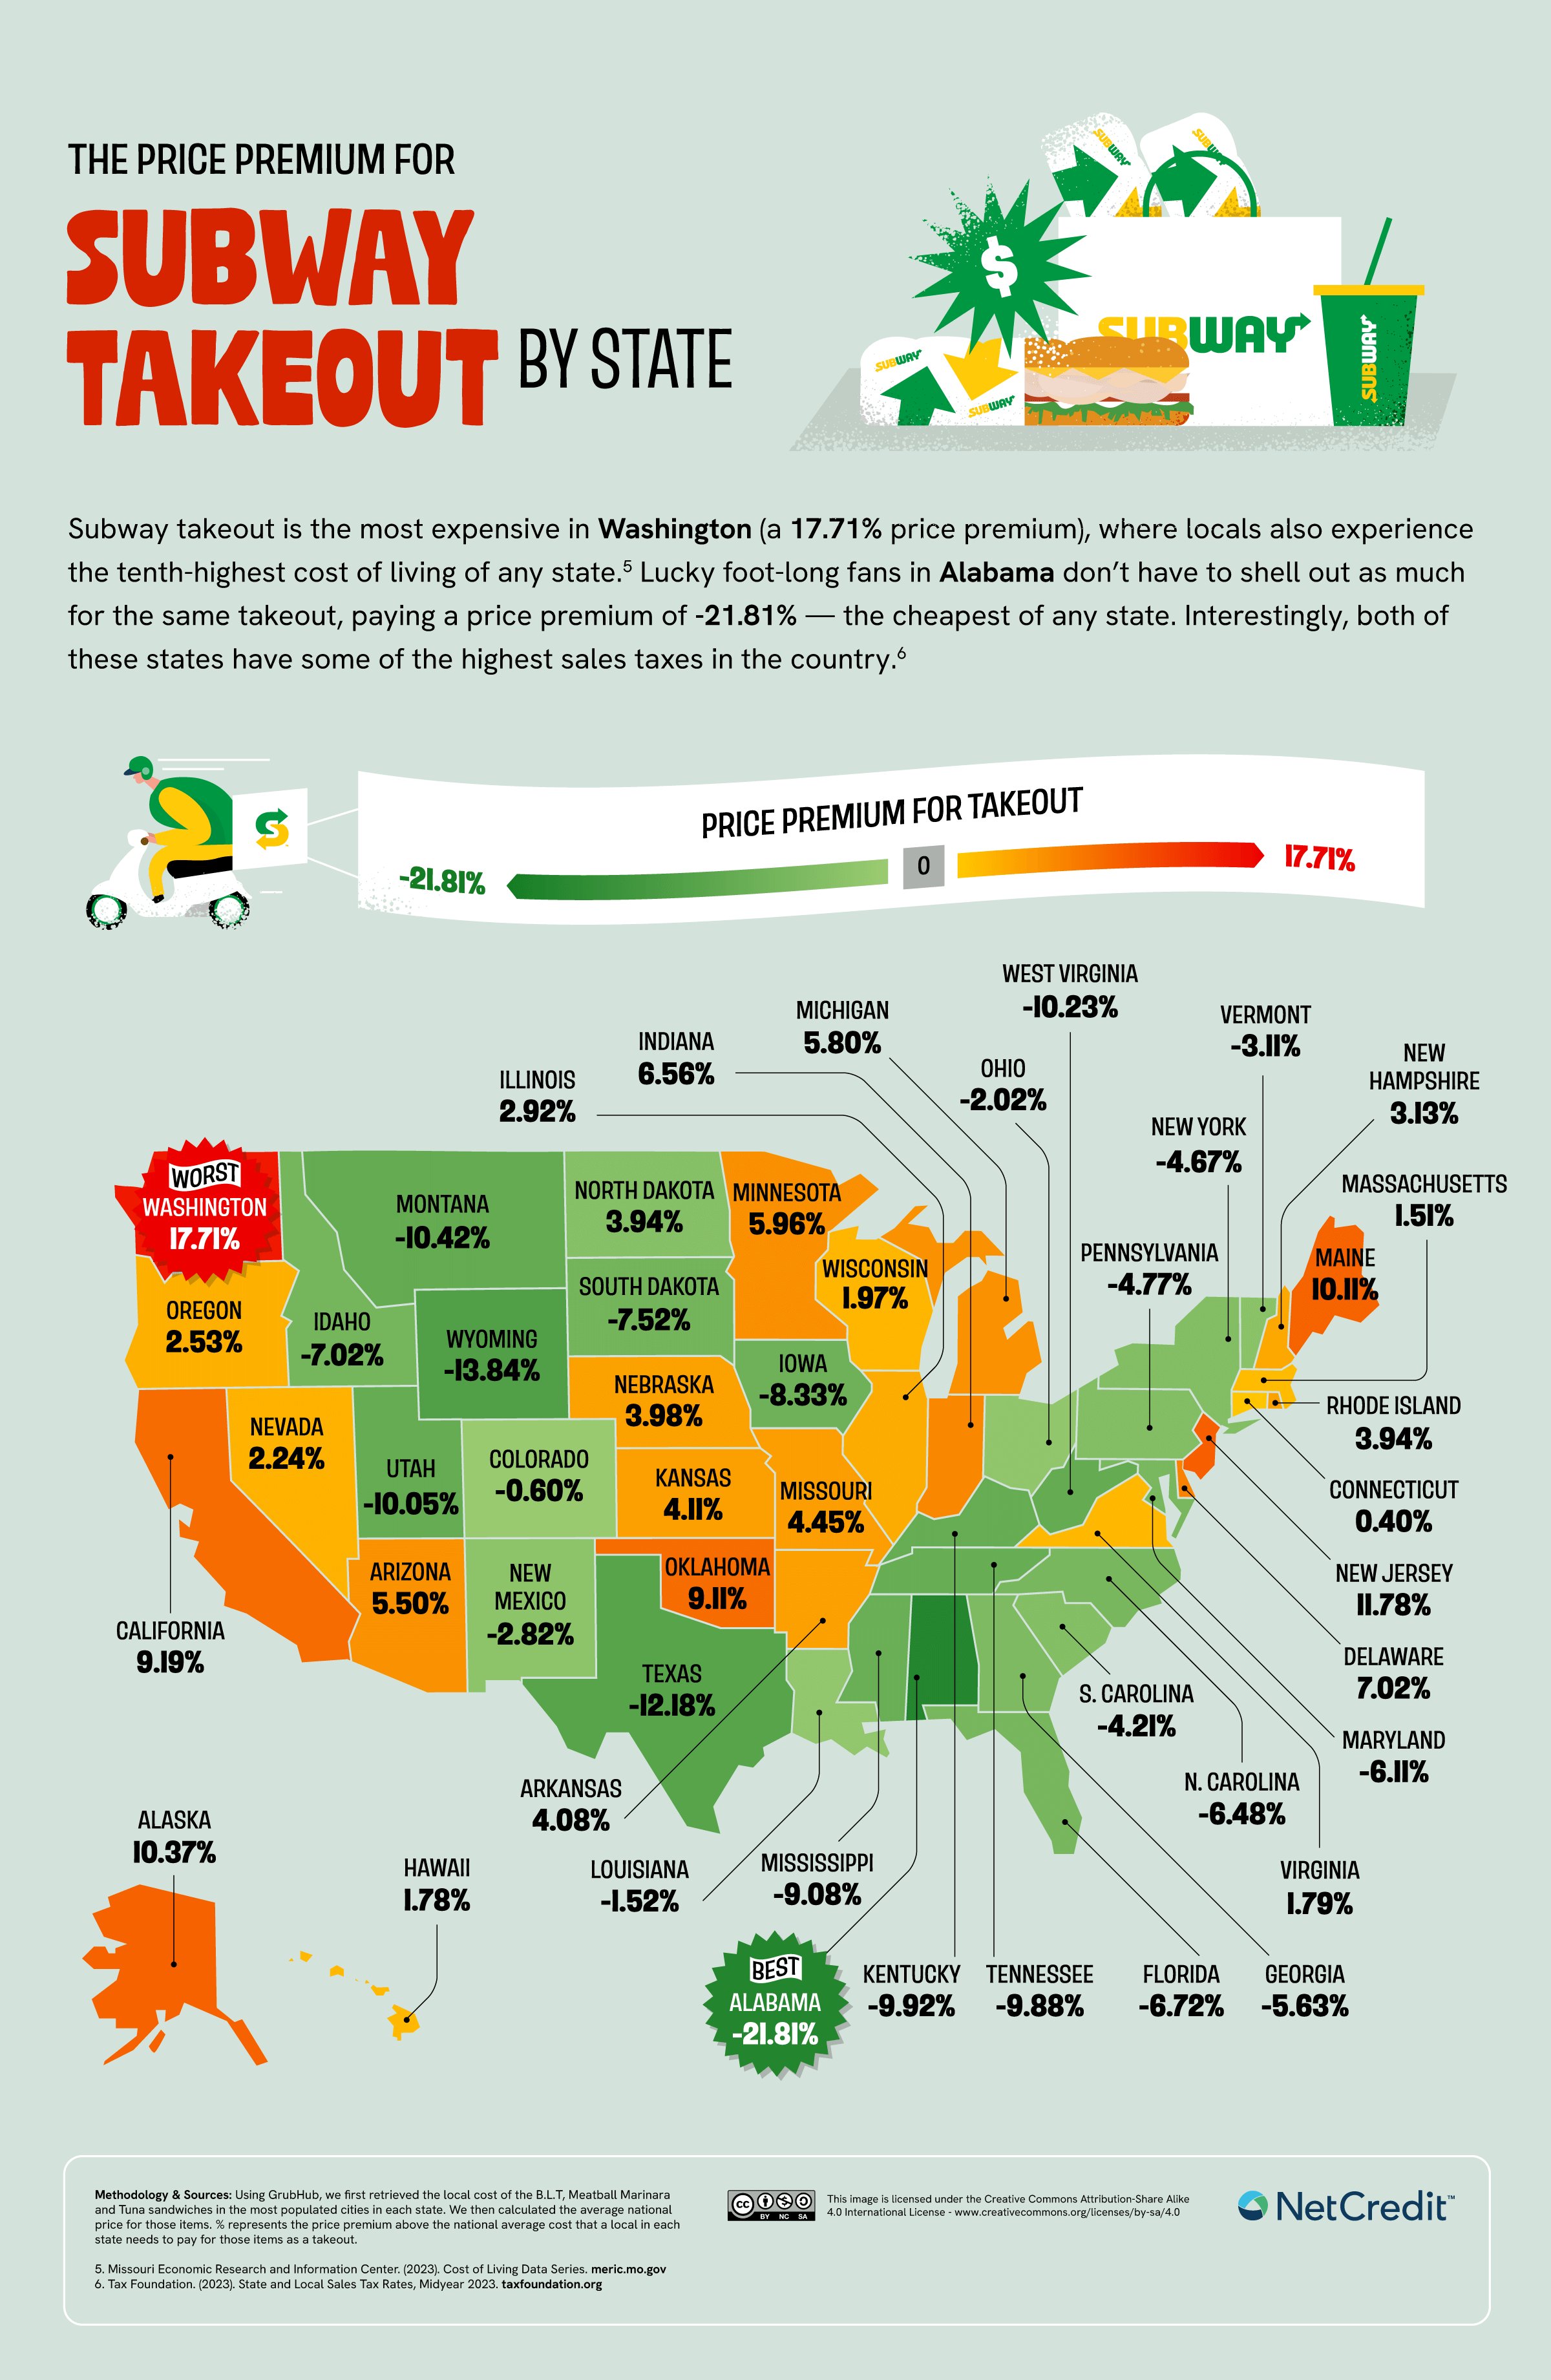 Infographic of price premium for Popeyes takeout by state.